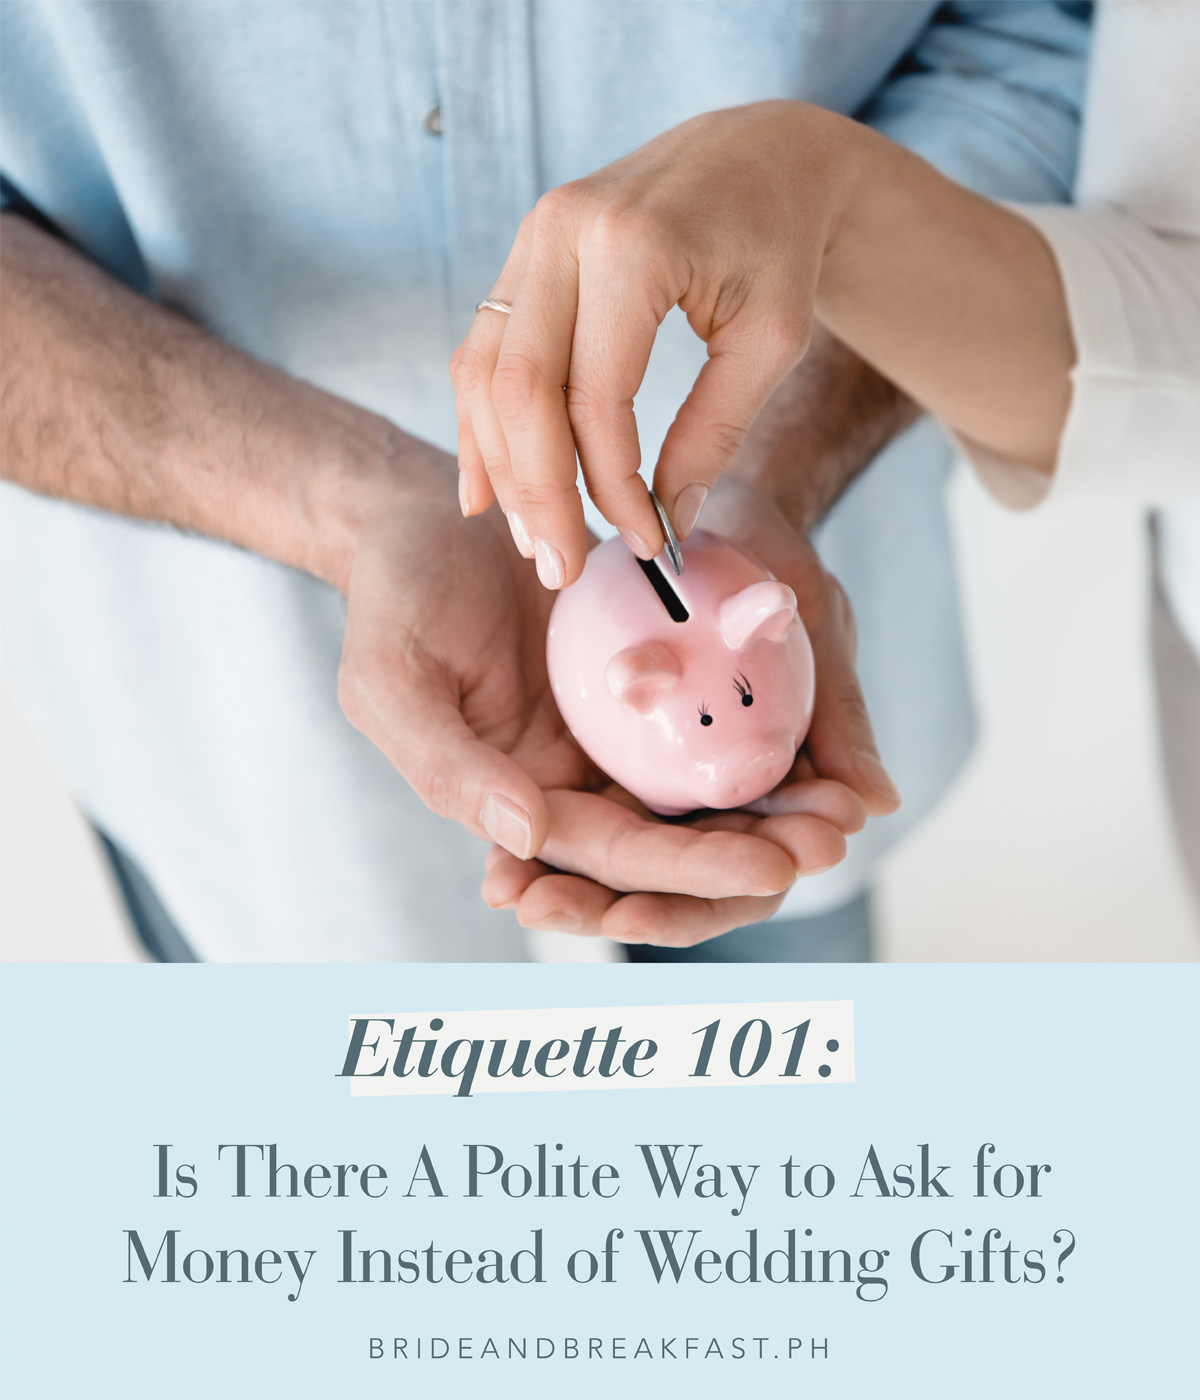 how to politely ask for money instead of wedding gifts cover